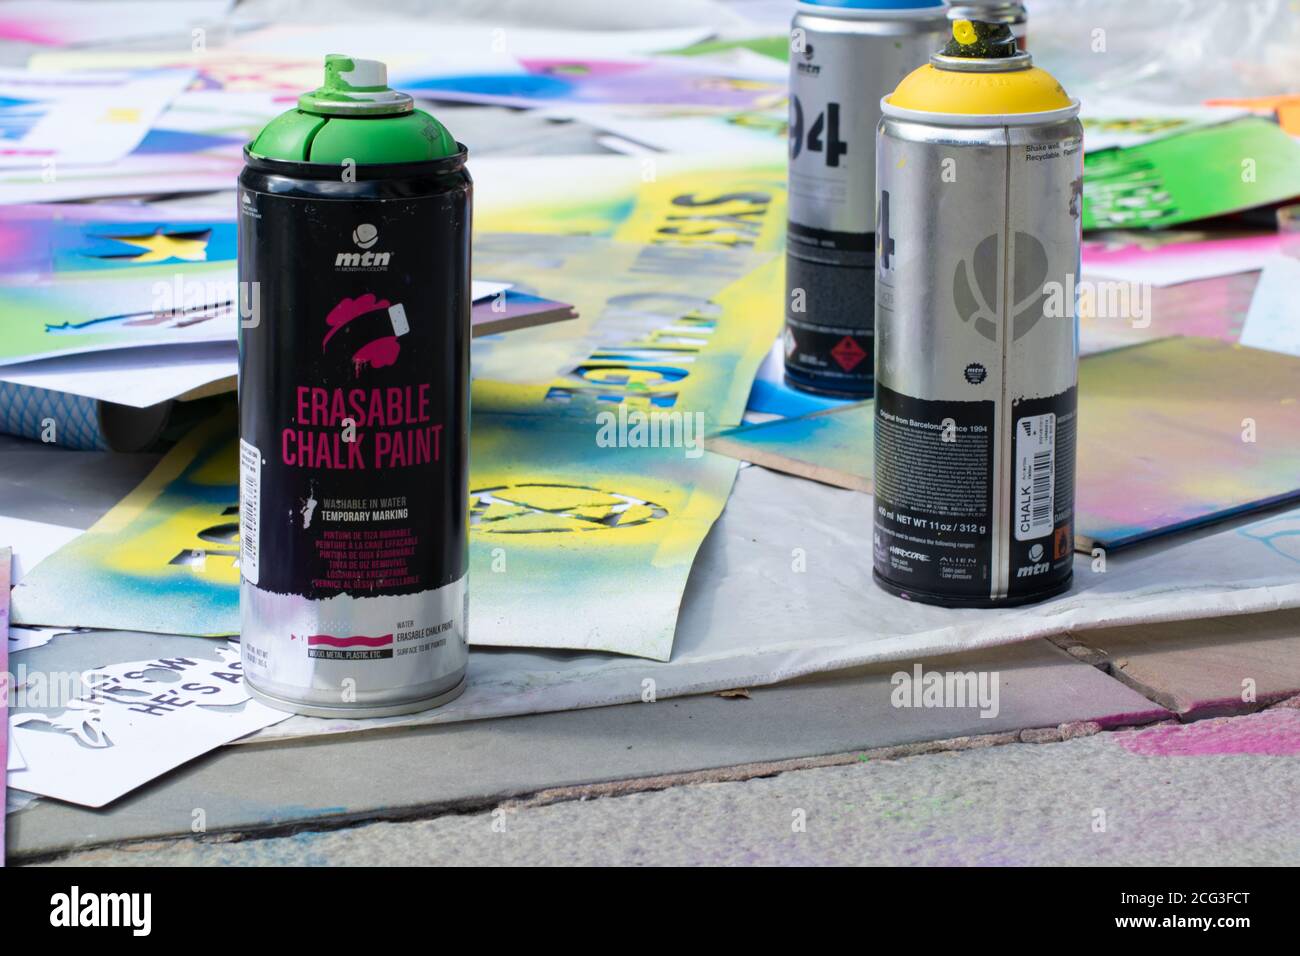 Stencil spraying using Montana Colors erasable chalk paint. Three cans of spray paint. Extinction Rebellion protest Manchester, UK with symbol. Stock Photo